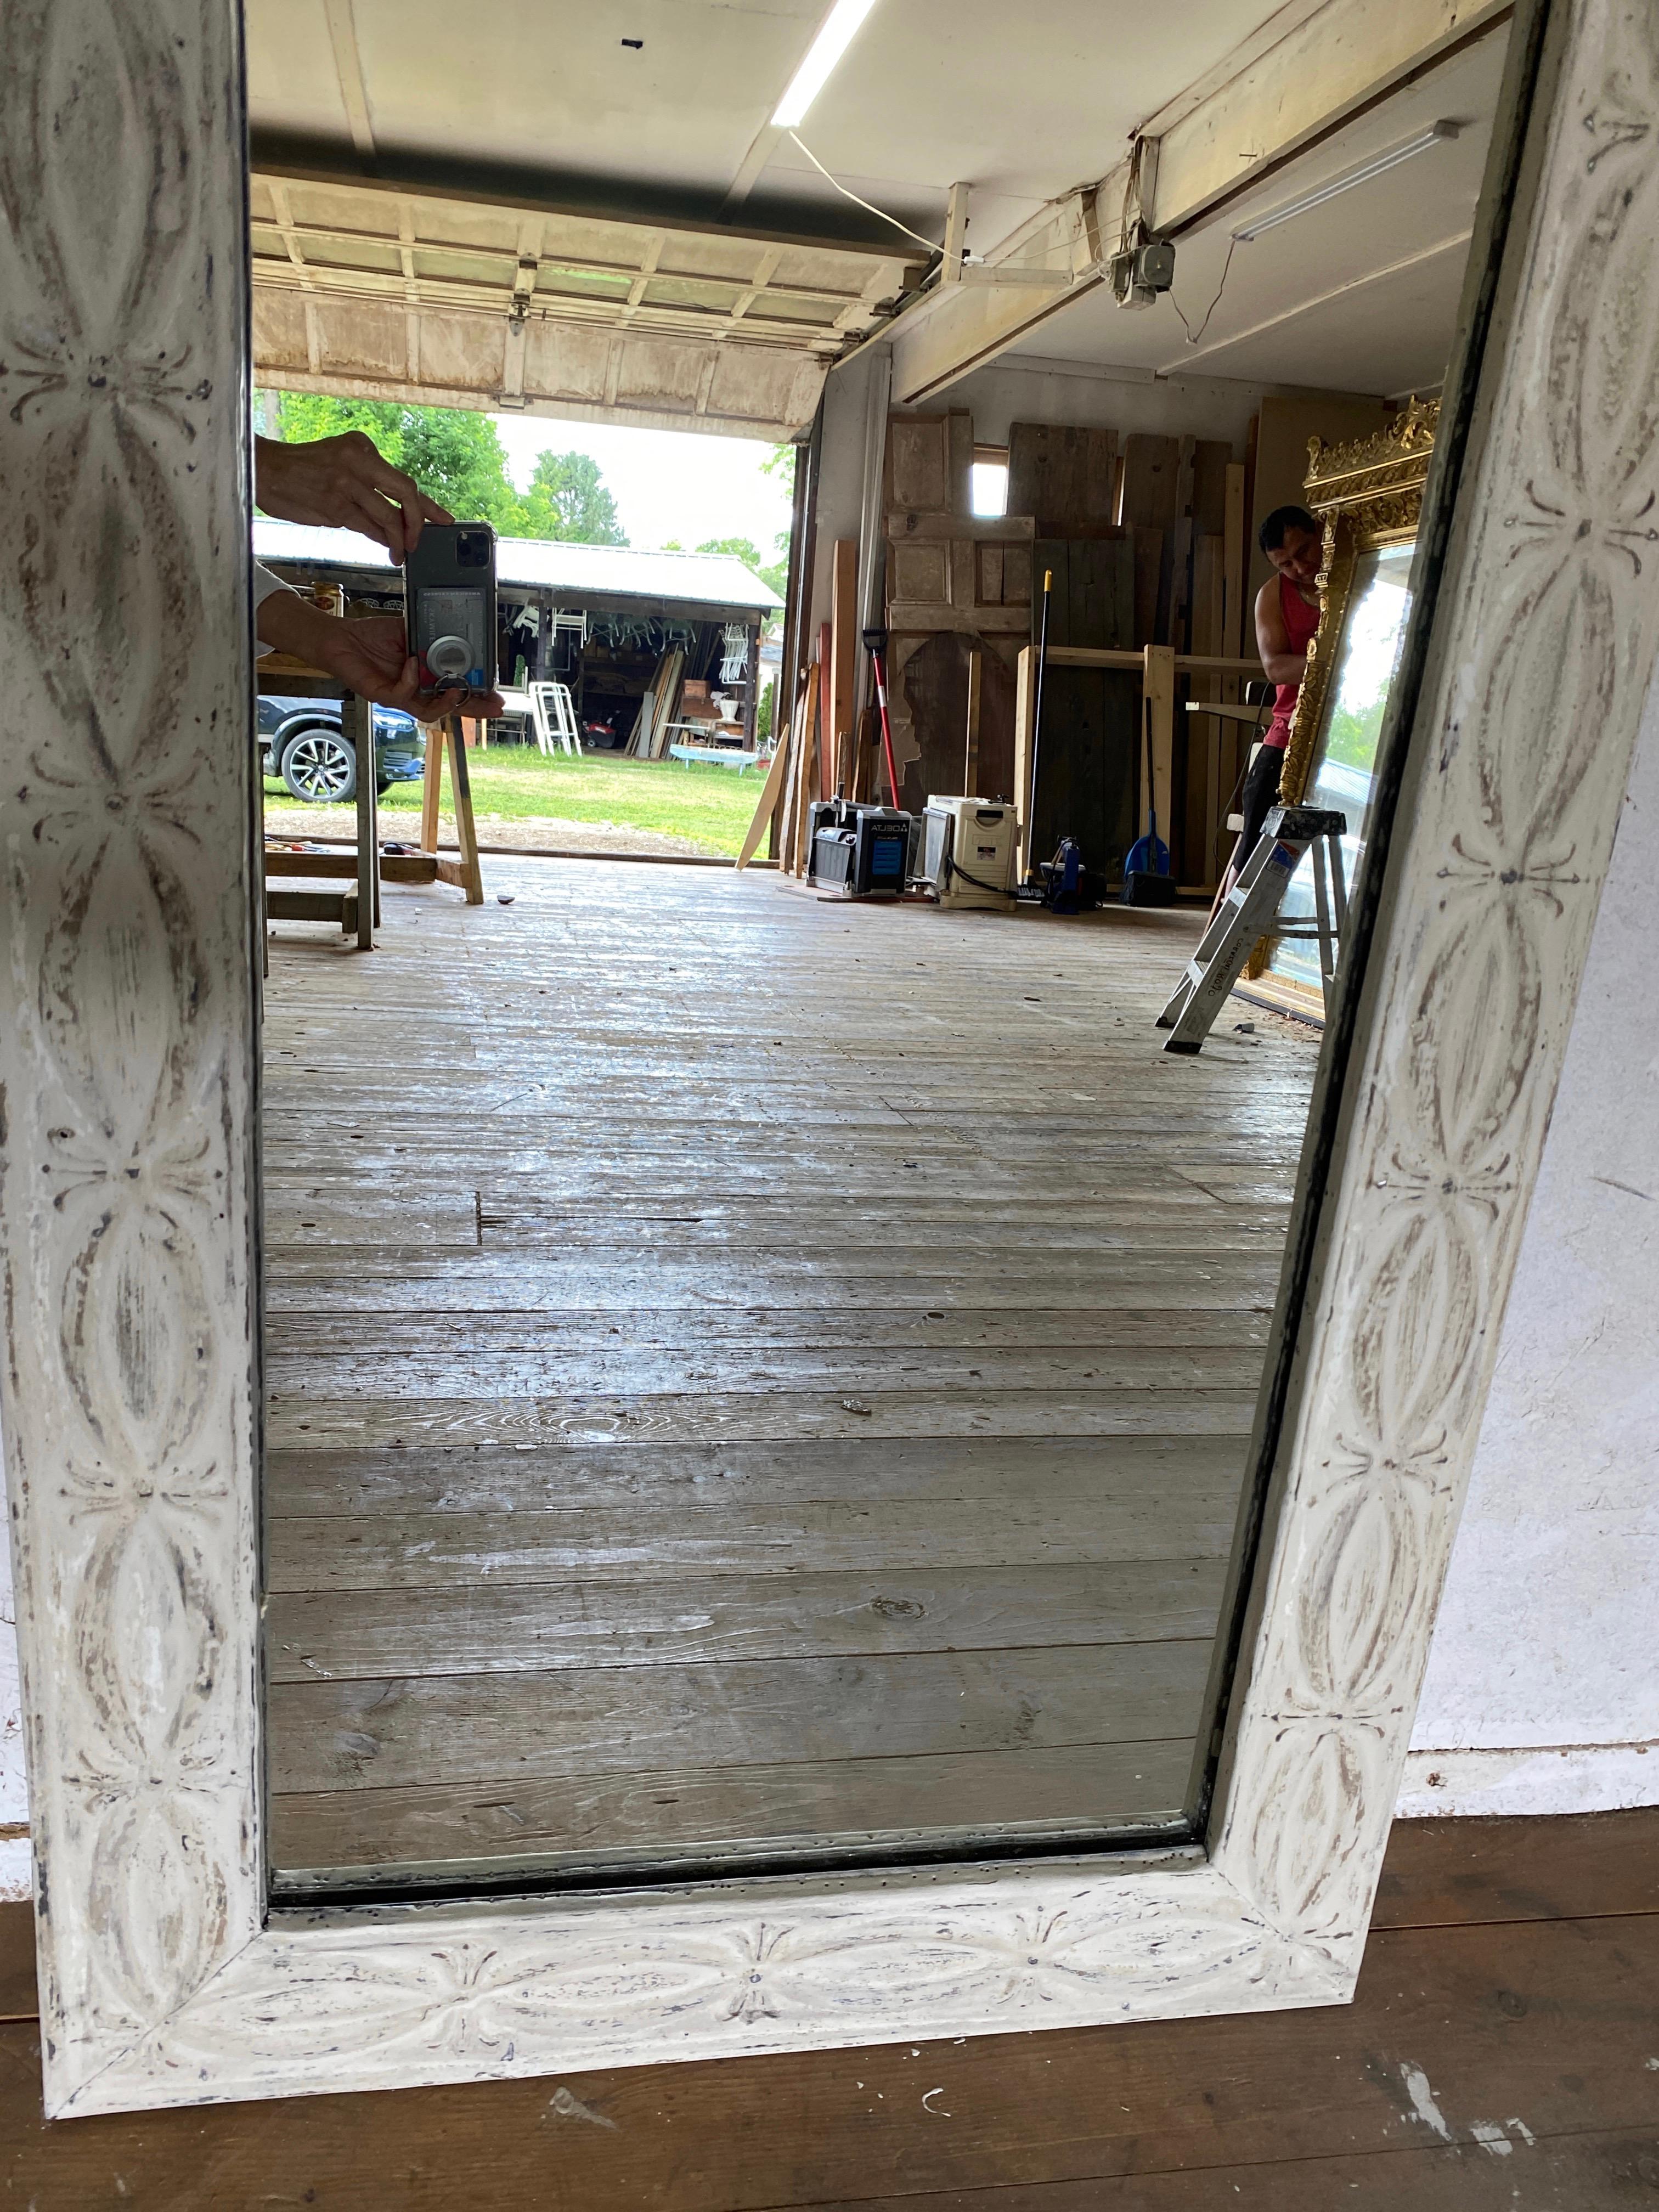 White washed rustic Industrial style full length floor mirror, frame made with antique tin ceiling tiles in the classical fish design.  Wonderful aged patina adding style, fun and character to any room, decor or style.
Search terms:  floor mirror,